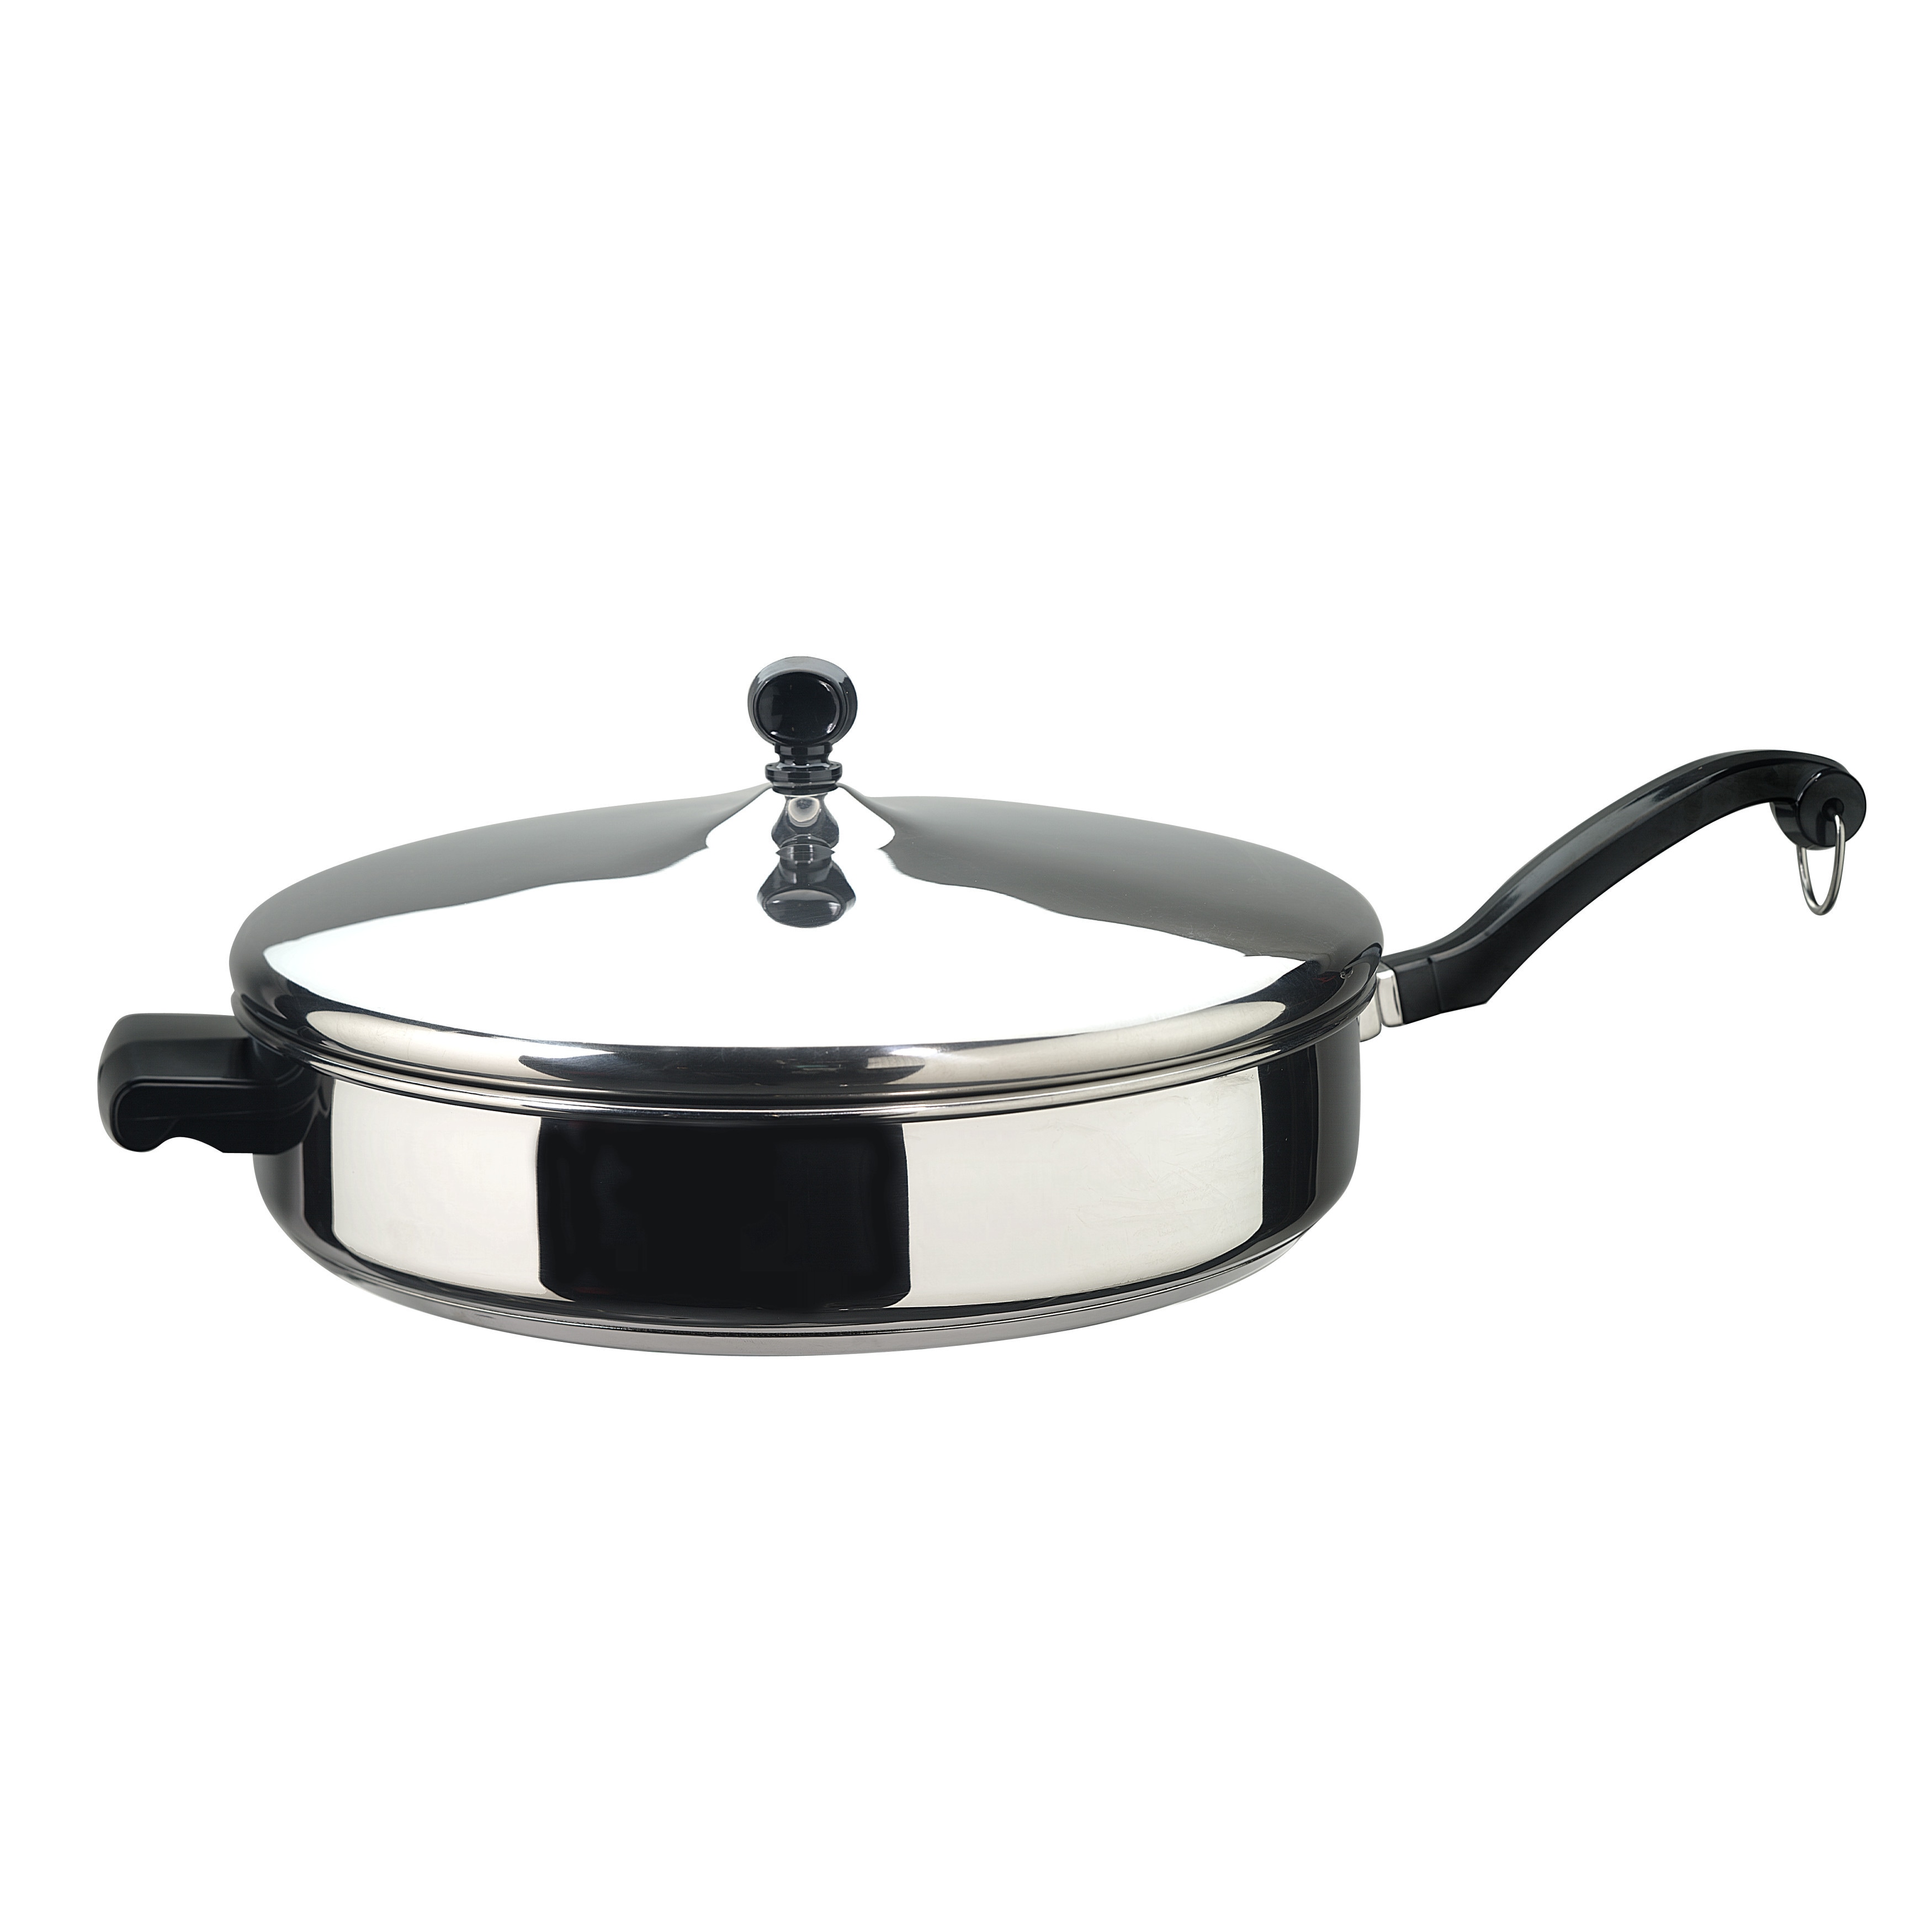 https://ak1.ostkcdn.com/images/products/6200865/Farberware-Classic-Series-Stainless-Steel-4-1-2-quart-Covered-Saute-Pan-with-Helper-Handle-9f90917f-3cc5-474a-9211-8259b23800fa.jpg